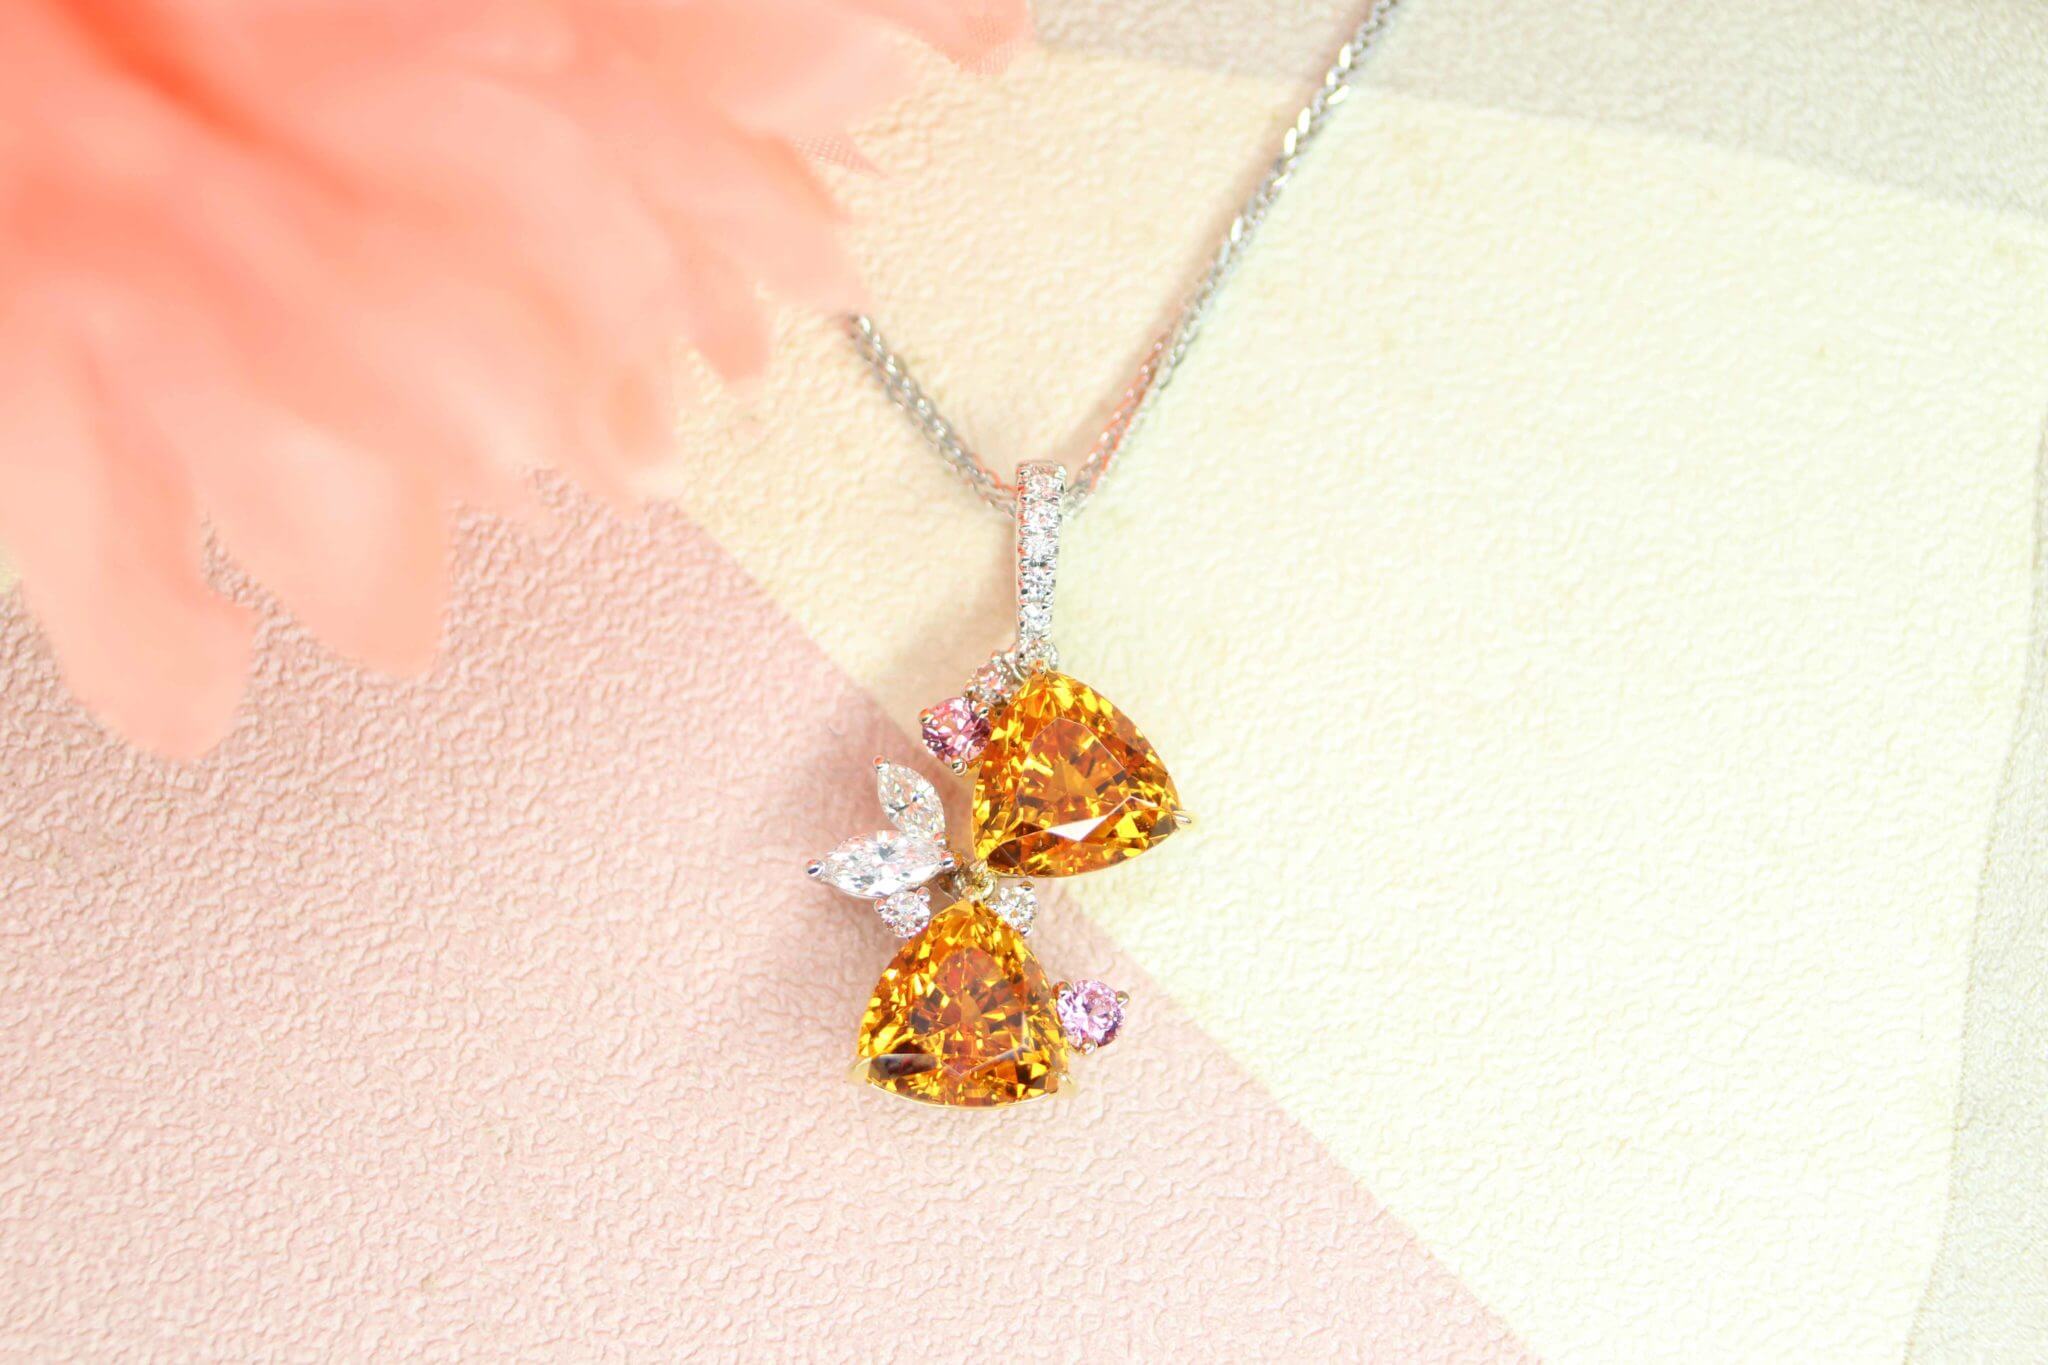 Mandarin Garnet in a pair customised to Pendant with unique Trilliant shape, customised in a non traditional bespoke setting - bespoke Jewellery | Local Bespoke Jewellery in fine jewellery with coloured gemstone.